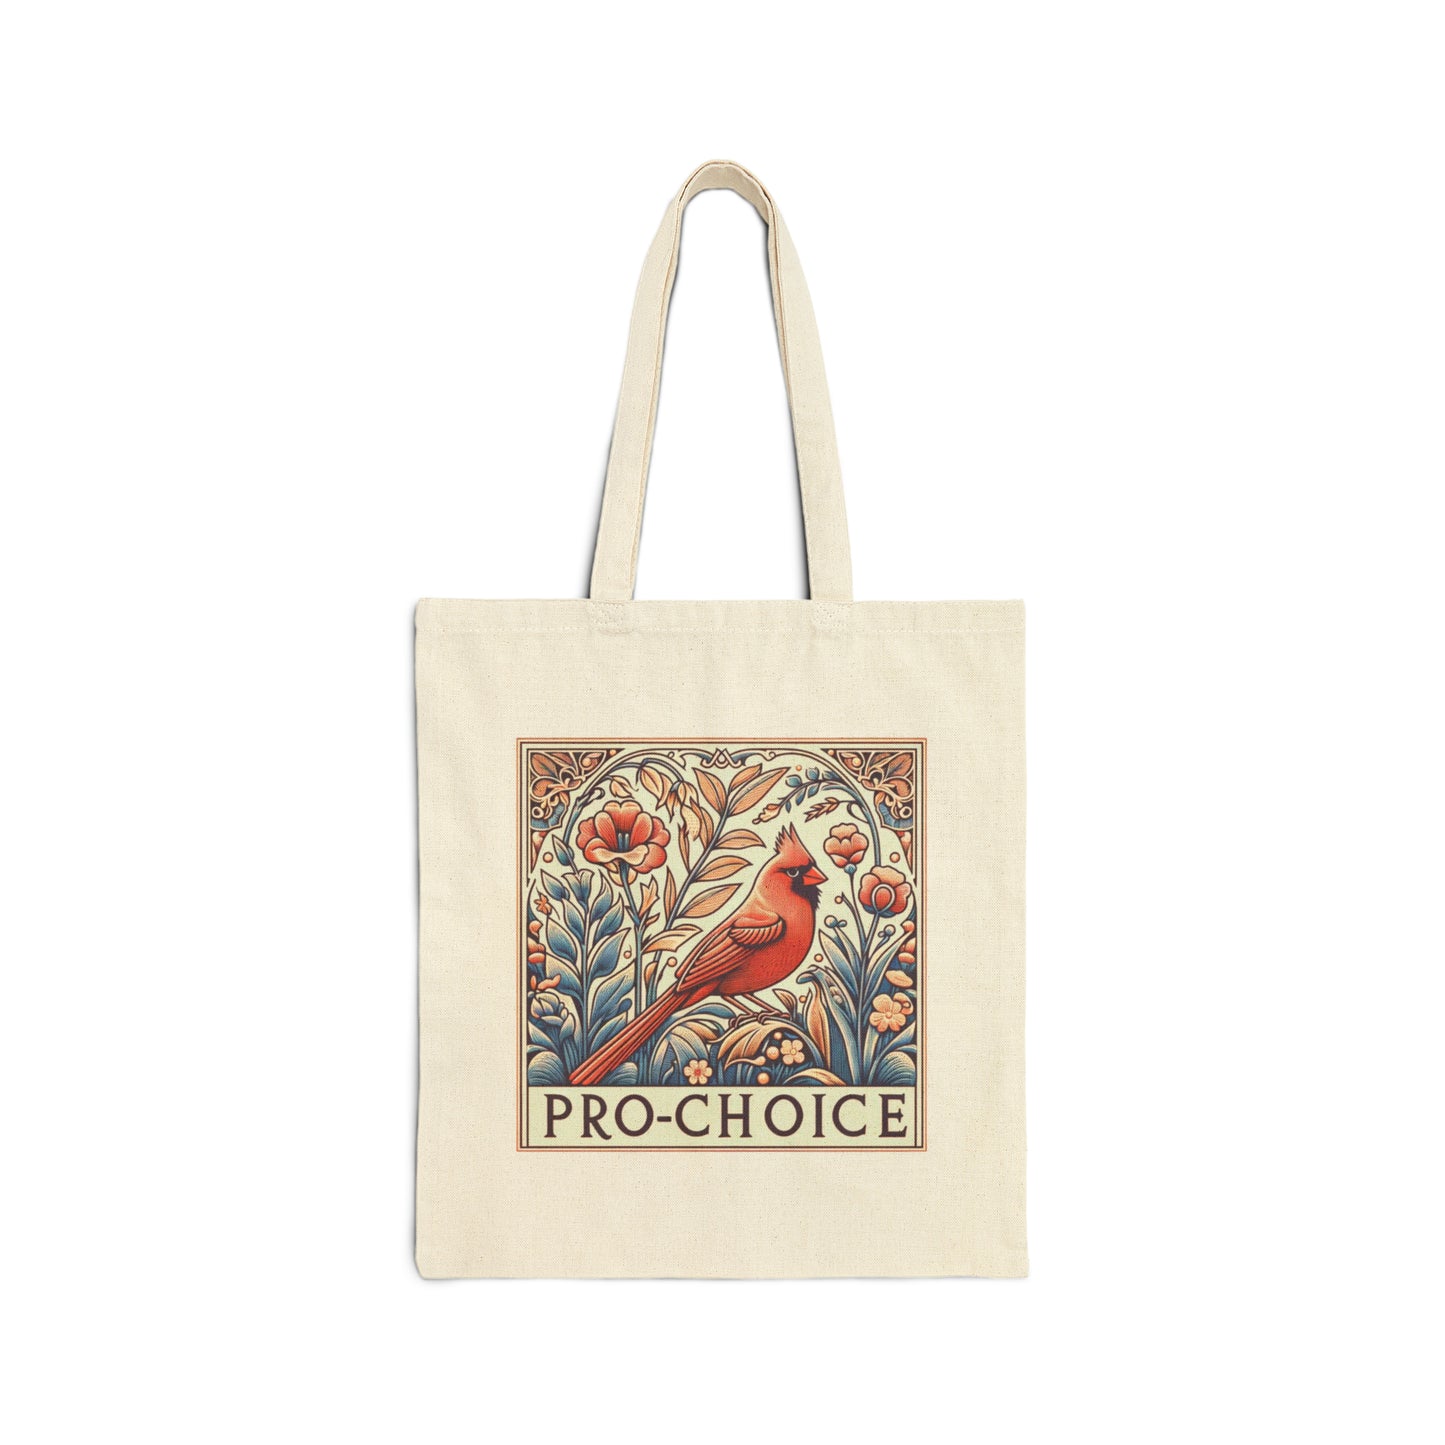 Bold Statement Cotton Cavas Tote Bag: Pro Choice! & carry a laptop, kindle, phone, ipad, notebook goodies to work/coffee house